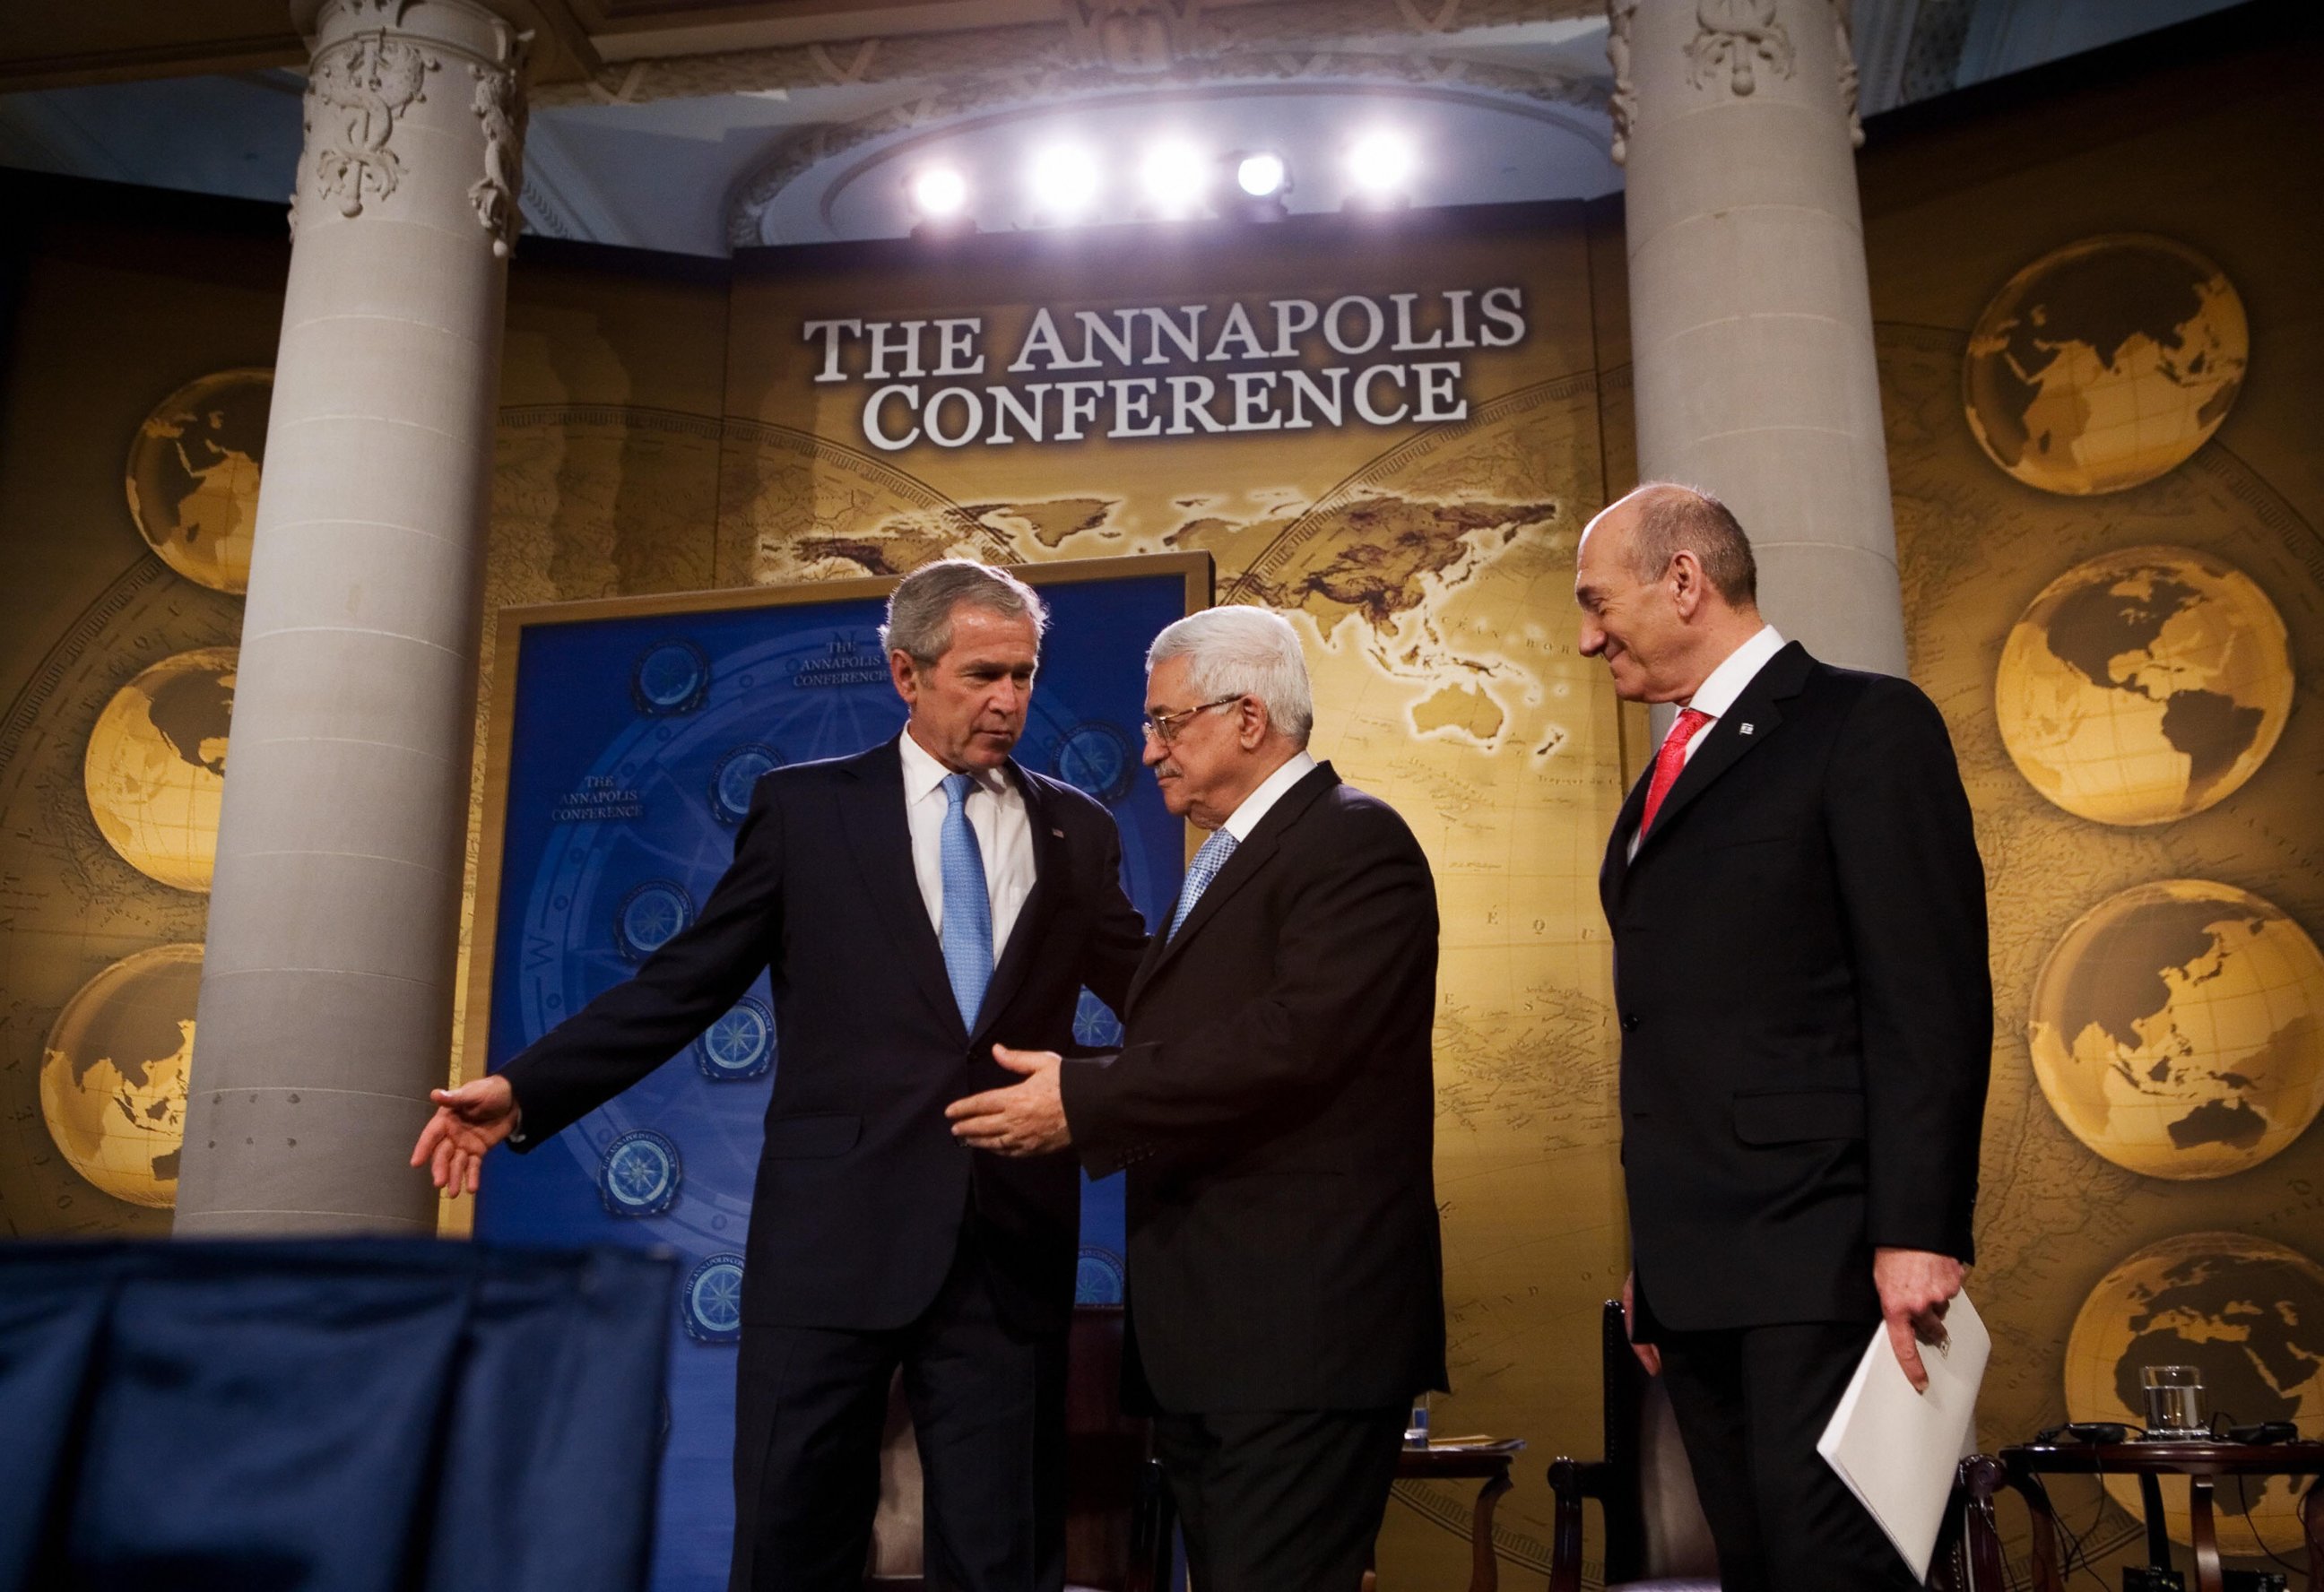 PHOTO: President George W. Bush, left, shows the way to Palestinian President Mahmud Abbas, center and Israeli Prime Minister Ehud Olmert after speaking November 27, 2007 during the Annapolis Conference at the US Naval Academy.